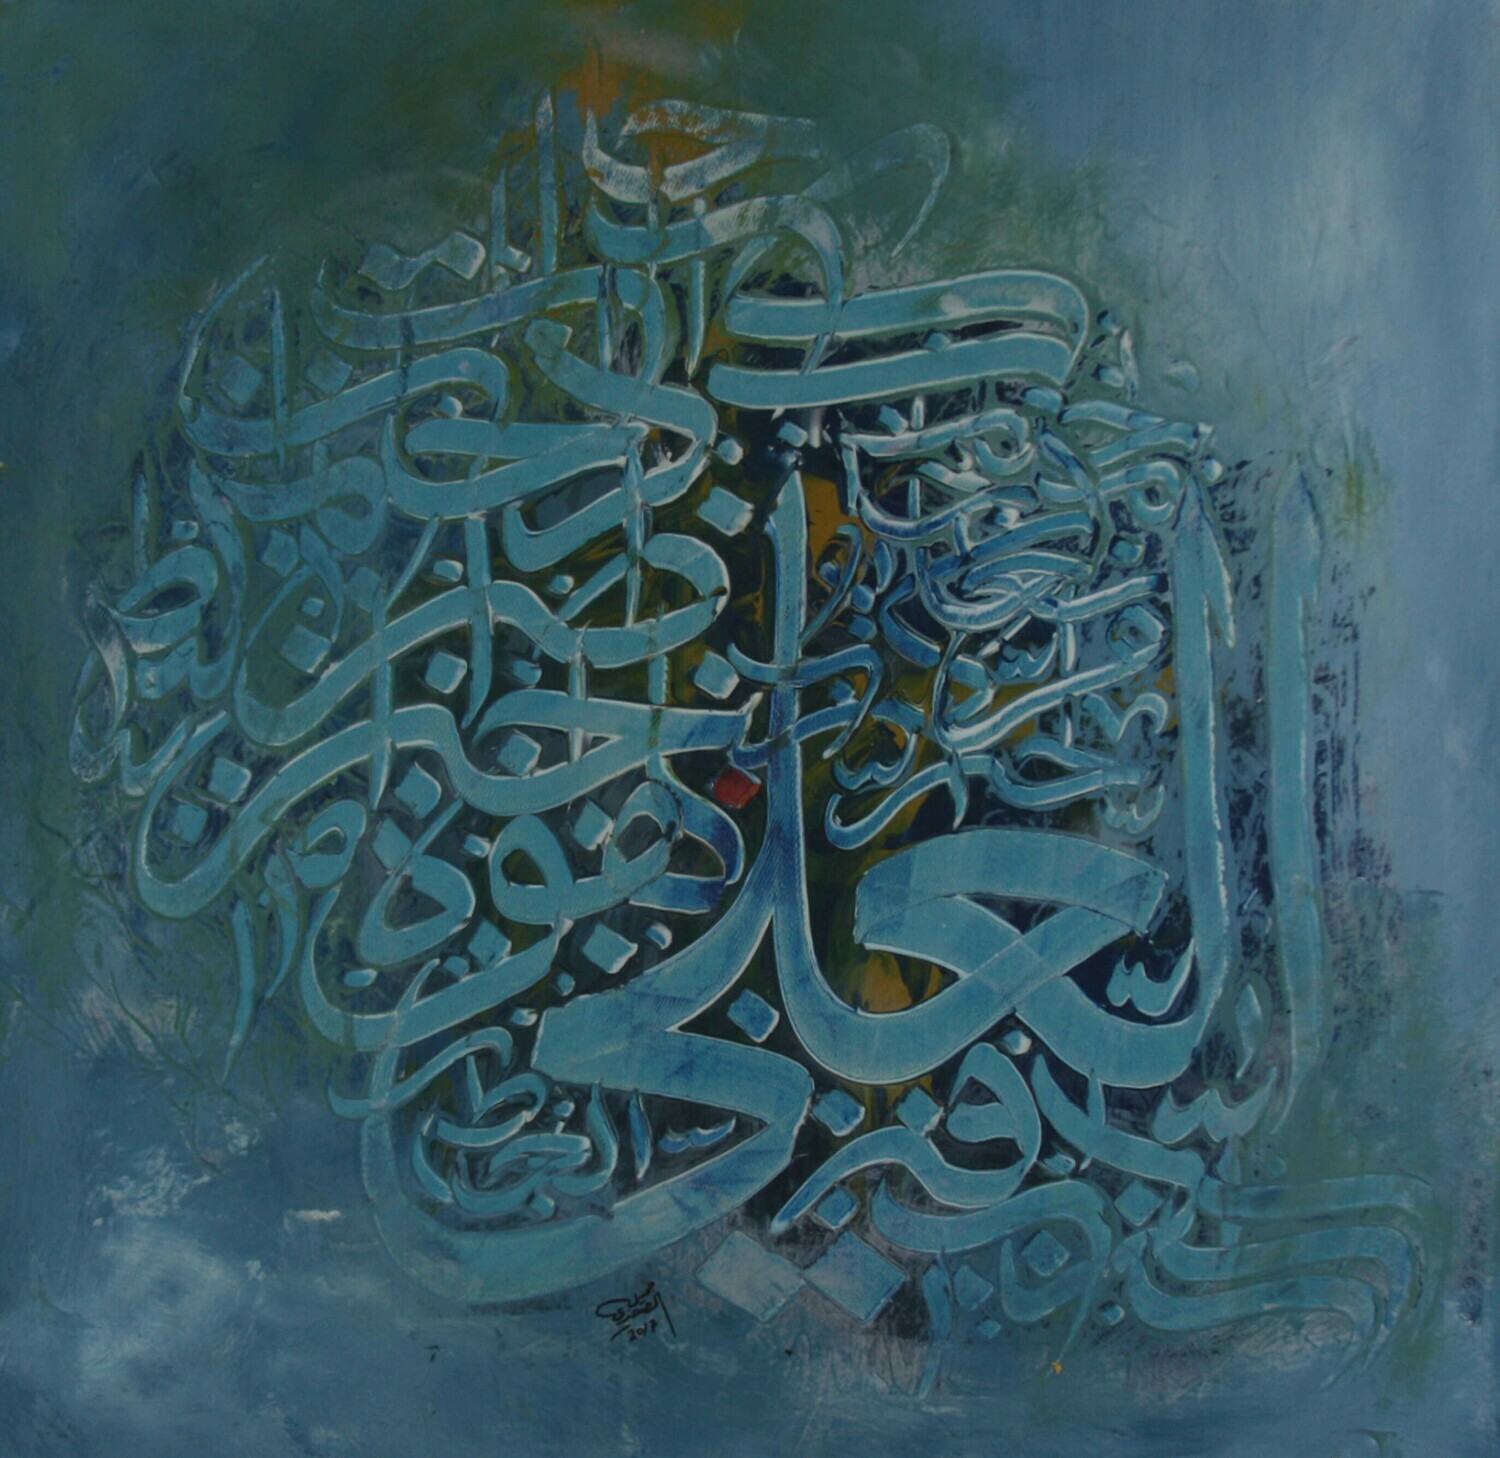 Al Aliyy - The Most High Textured Multi-Media Original Hand painted Canvas